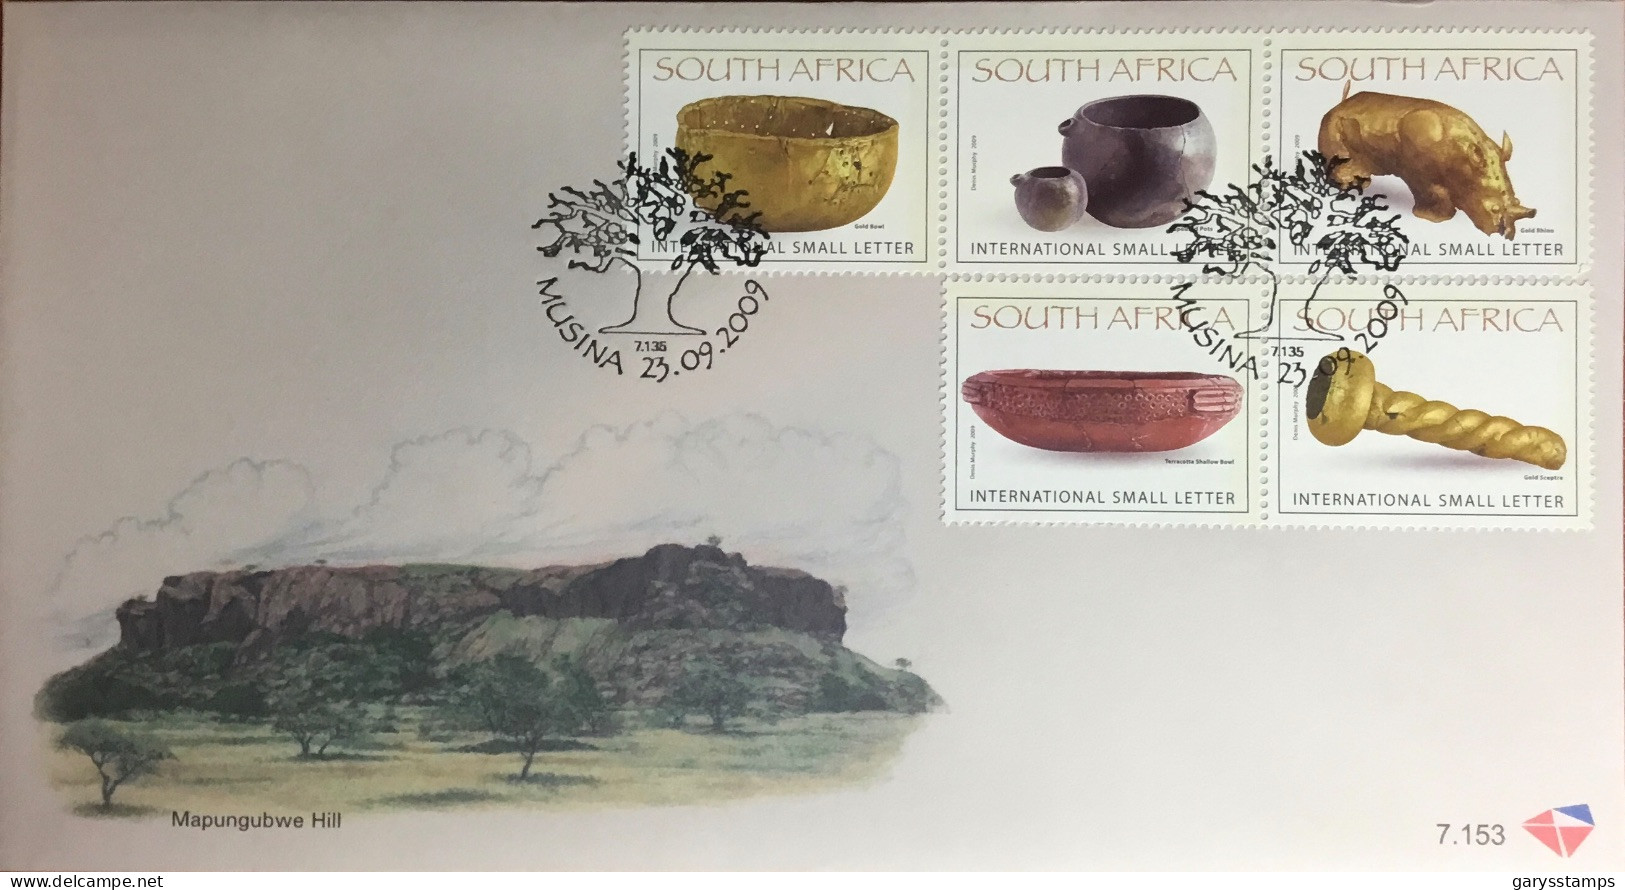 South Africa 2009 Mapungubwe Heritage Site FDC Cover - FDC